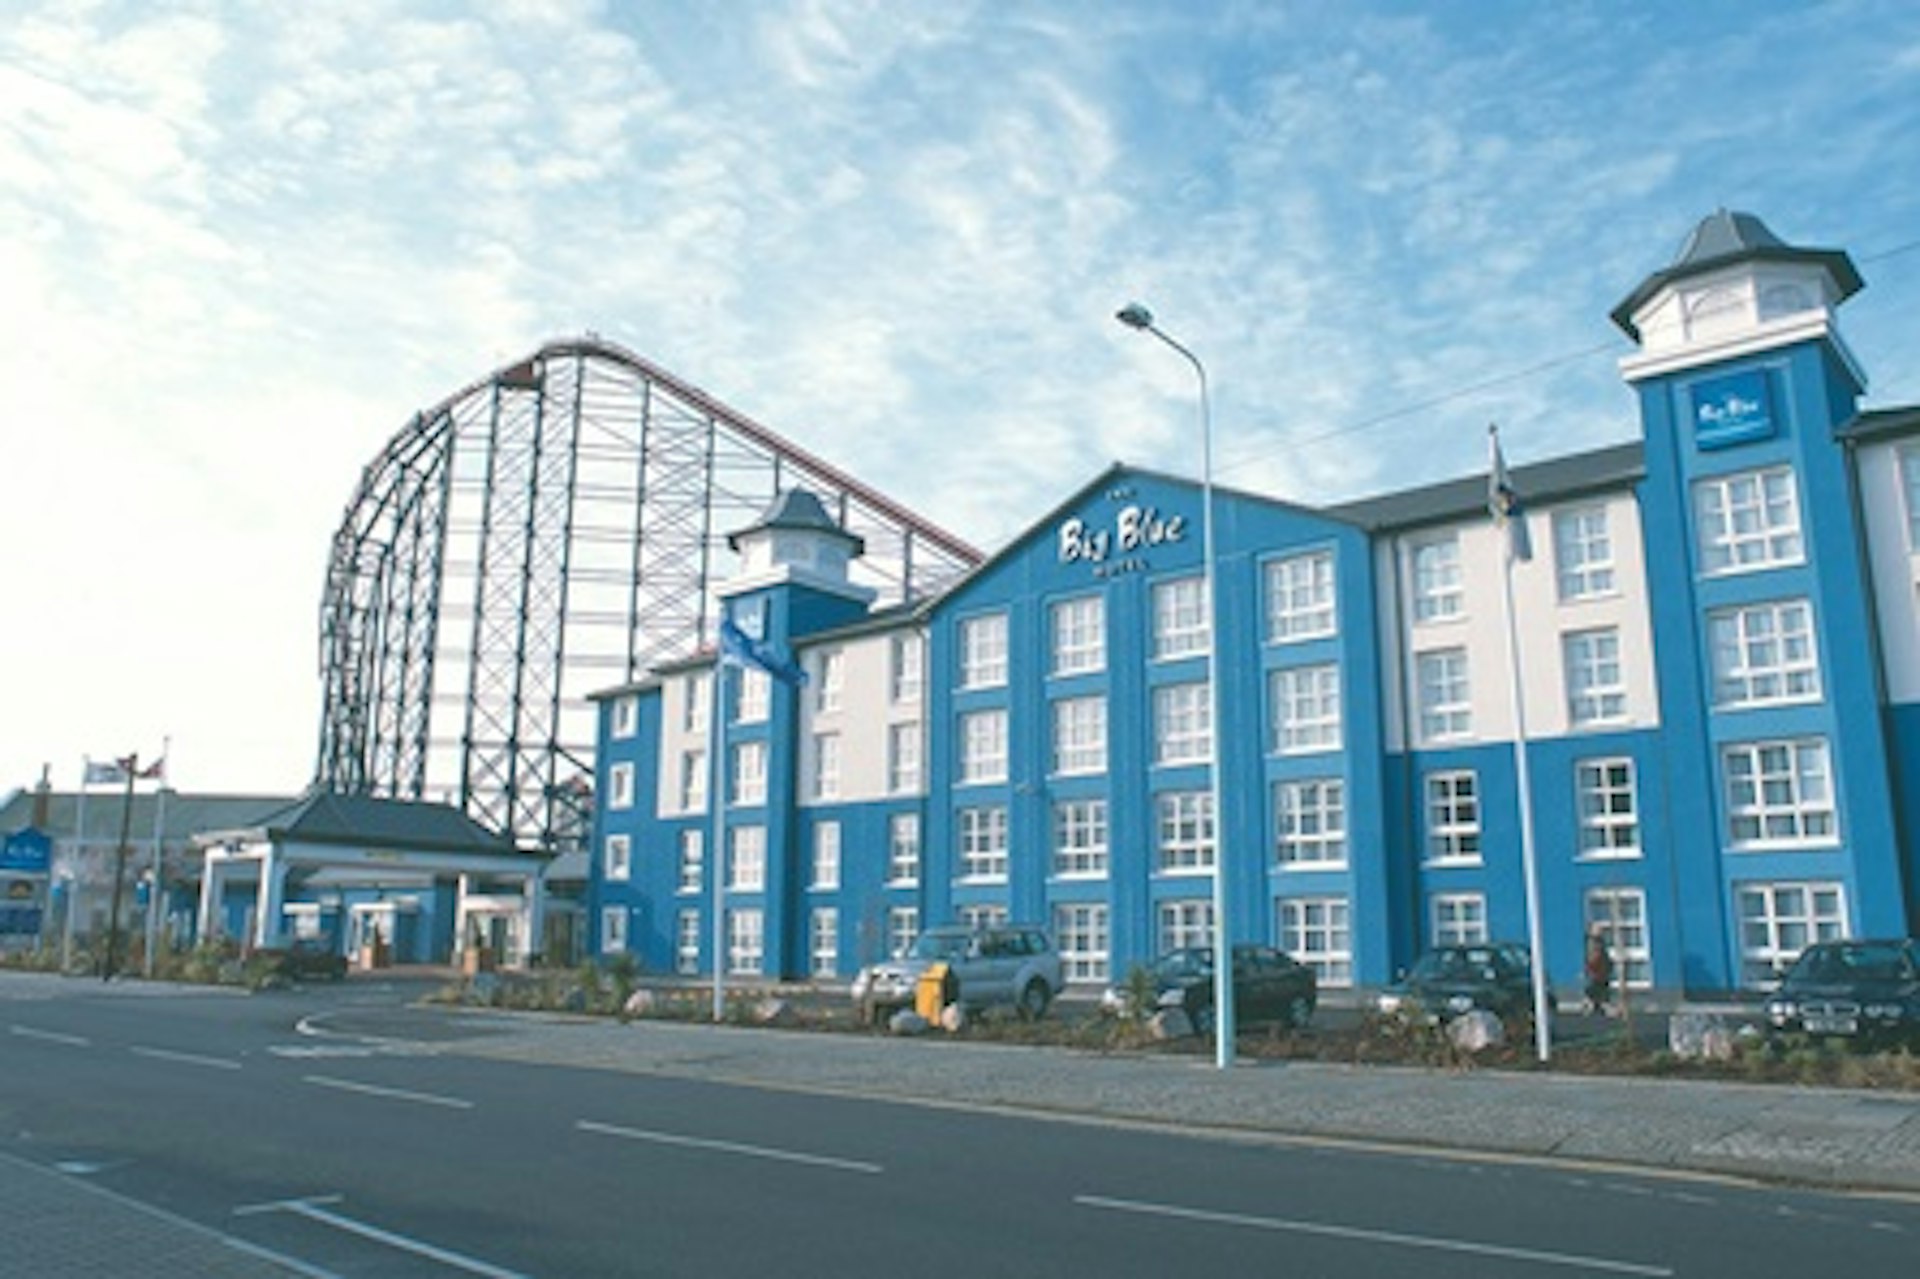 One Night Coastal Escape with Dinner for Two at The Big Blue Hotel, Blackpool 3